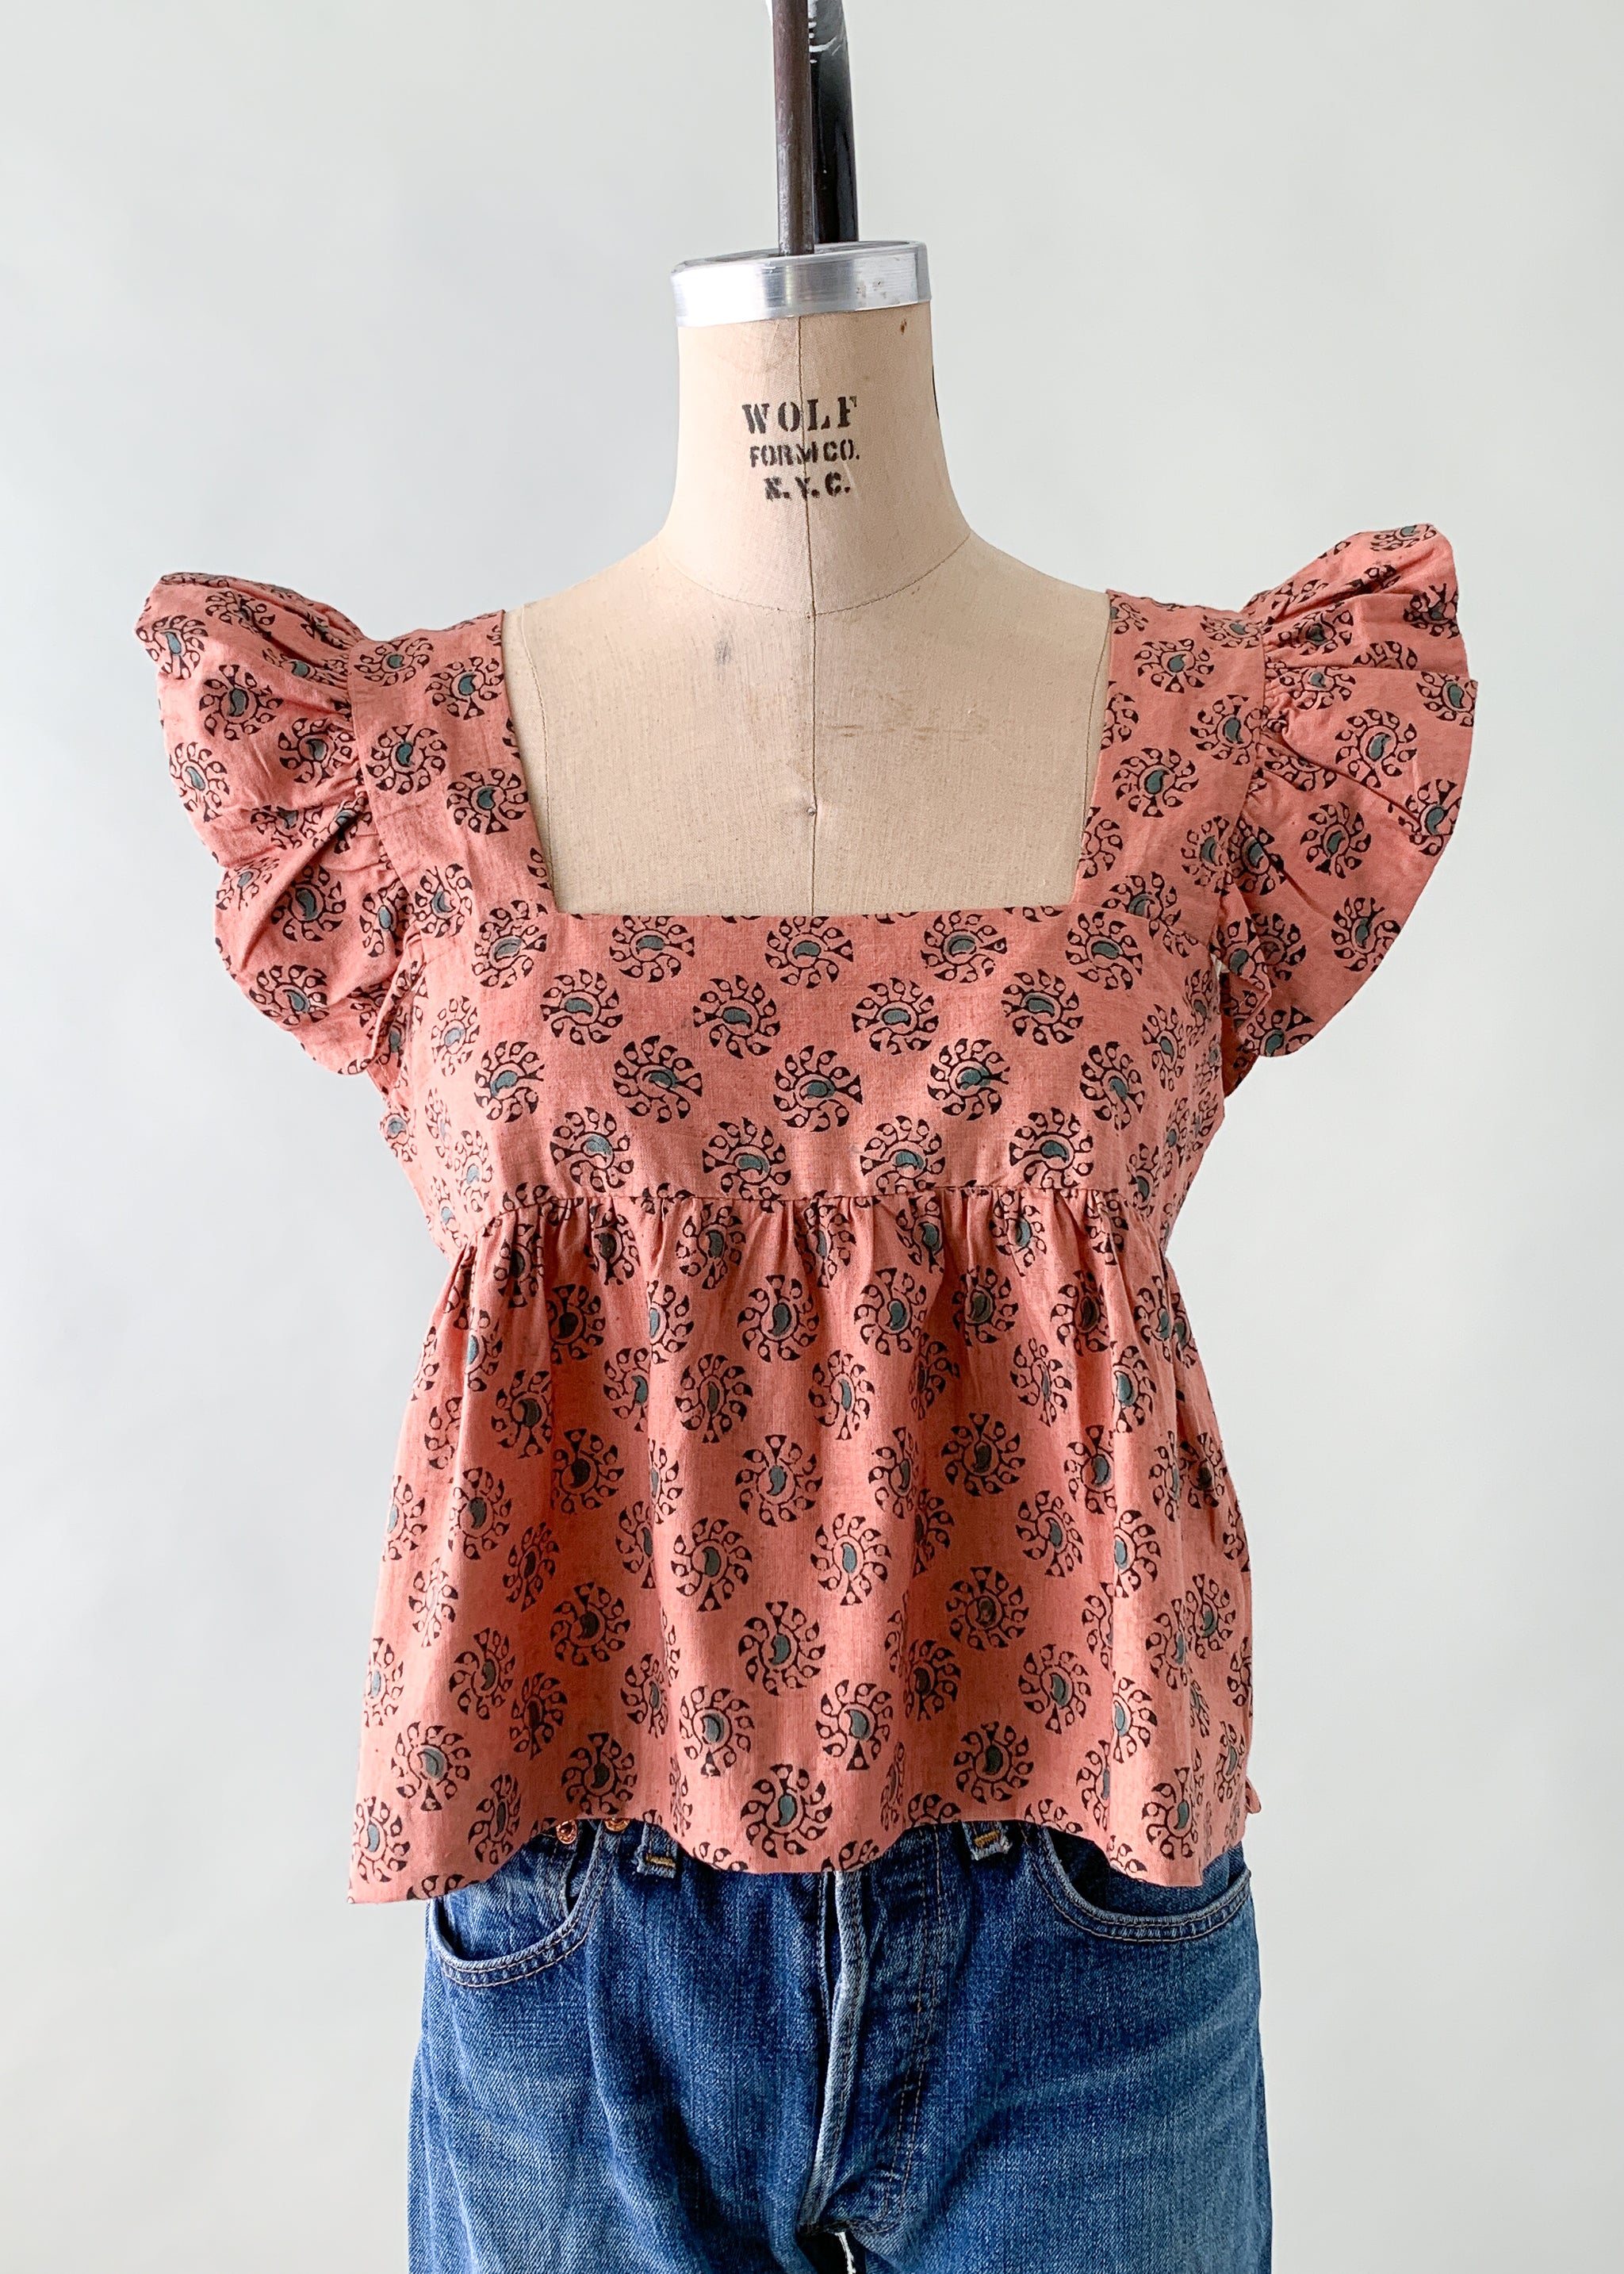 Vintage 1970s Indian Cotton Ruffle Top - Raleigh Vintage